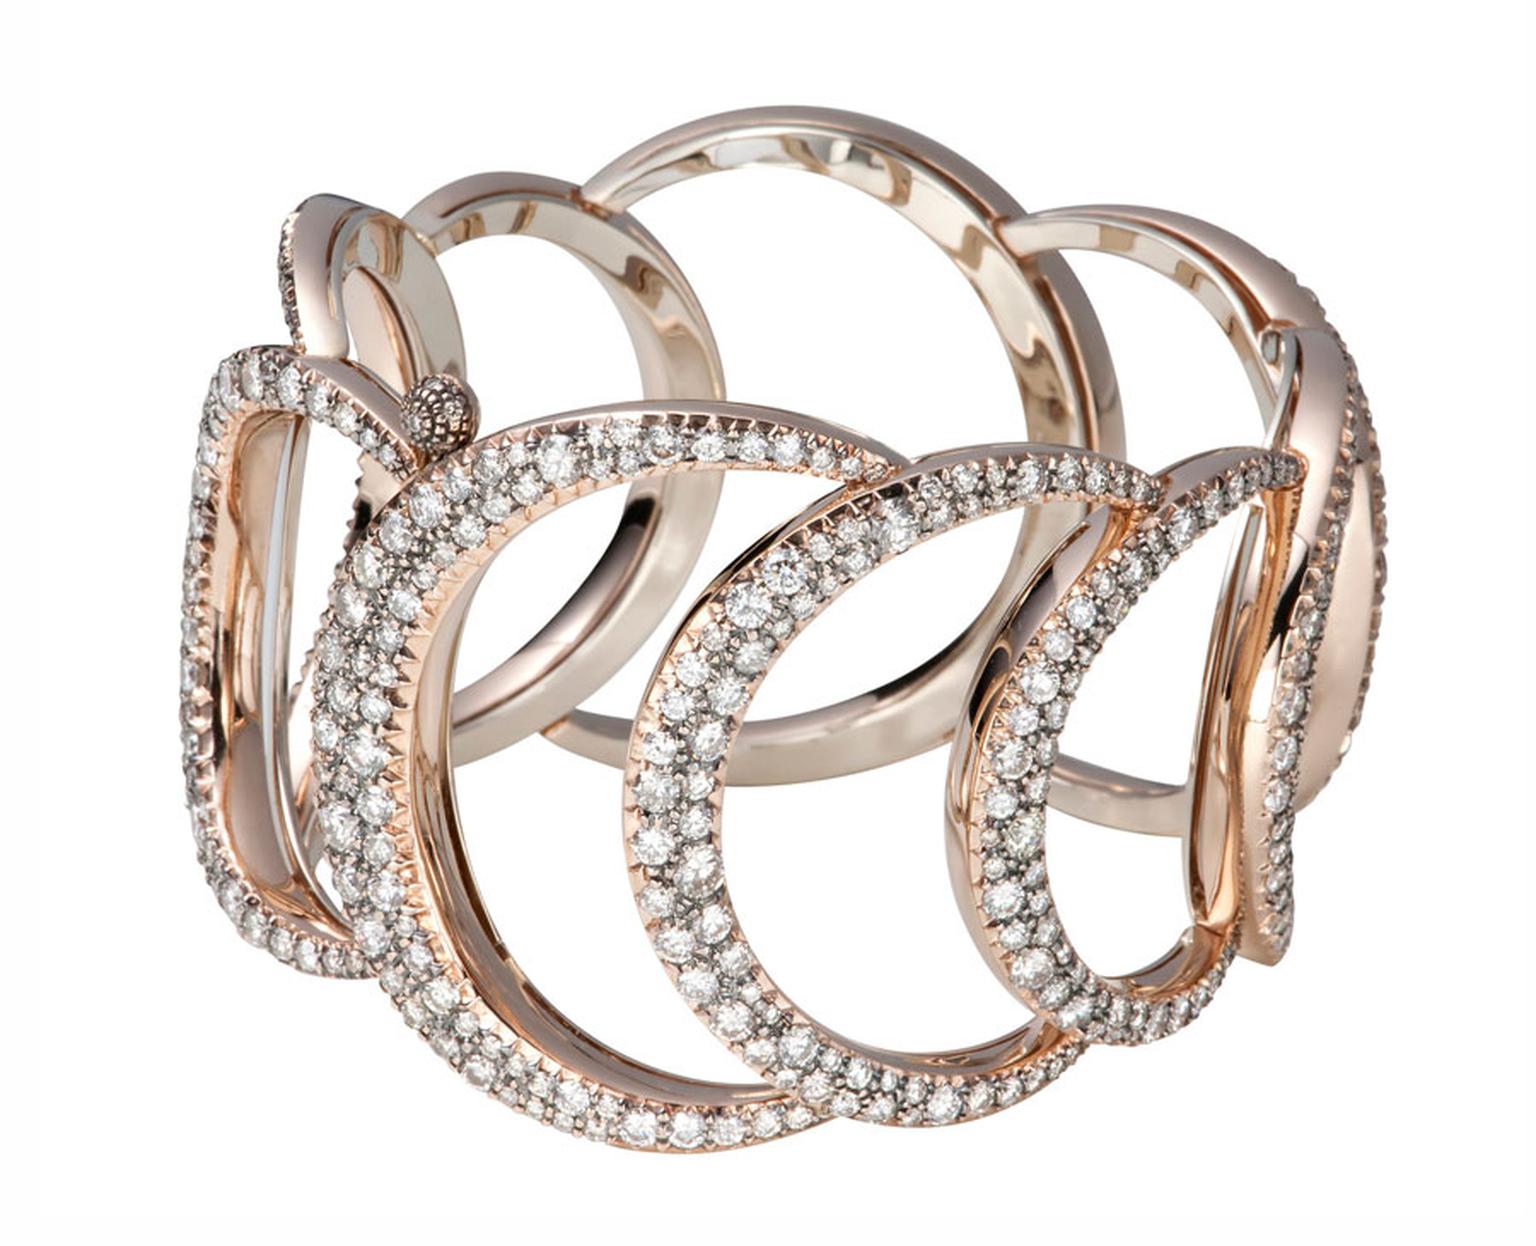 H-Stern-Bracelet-in-rose-and-Noble-gold-with-diamonds.jpg